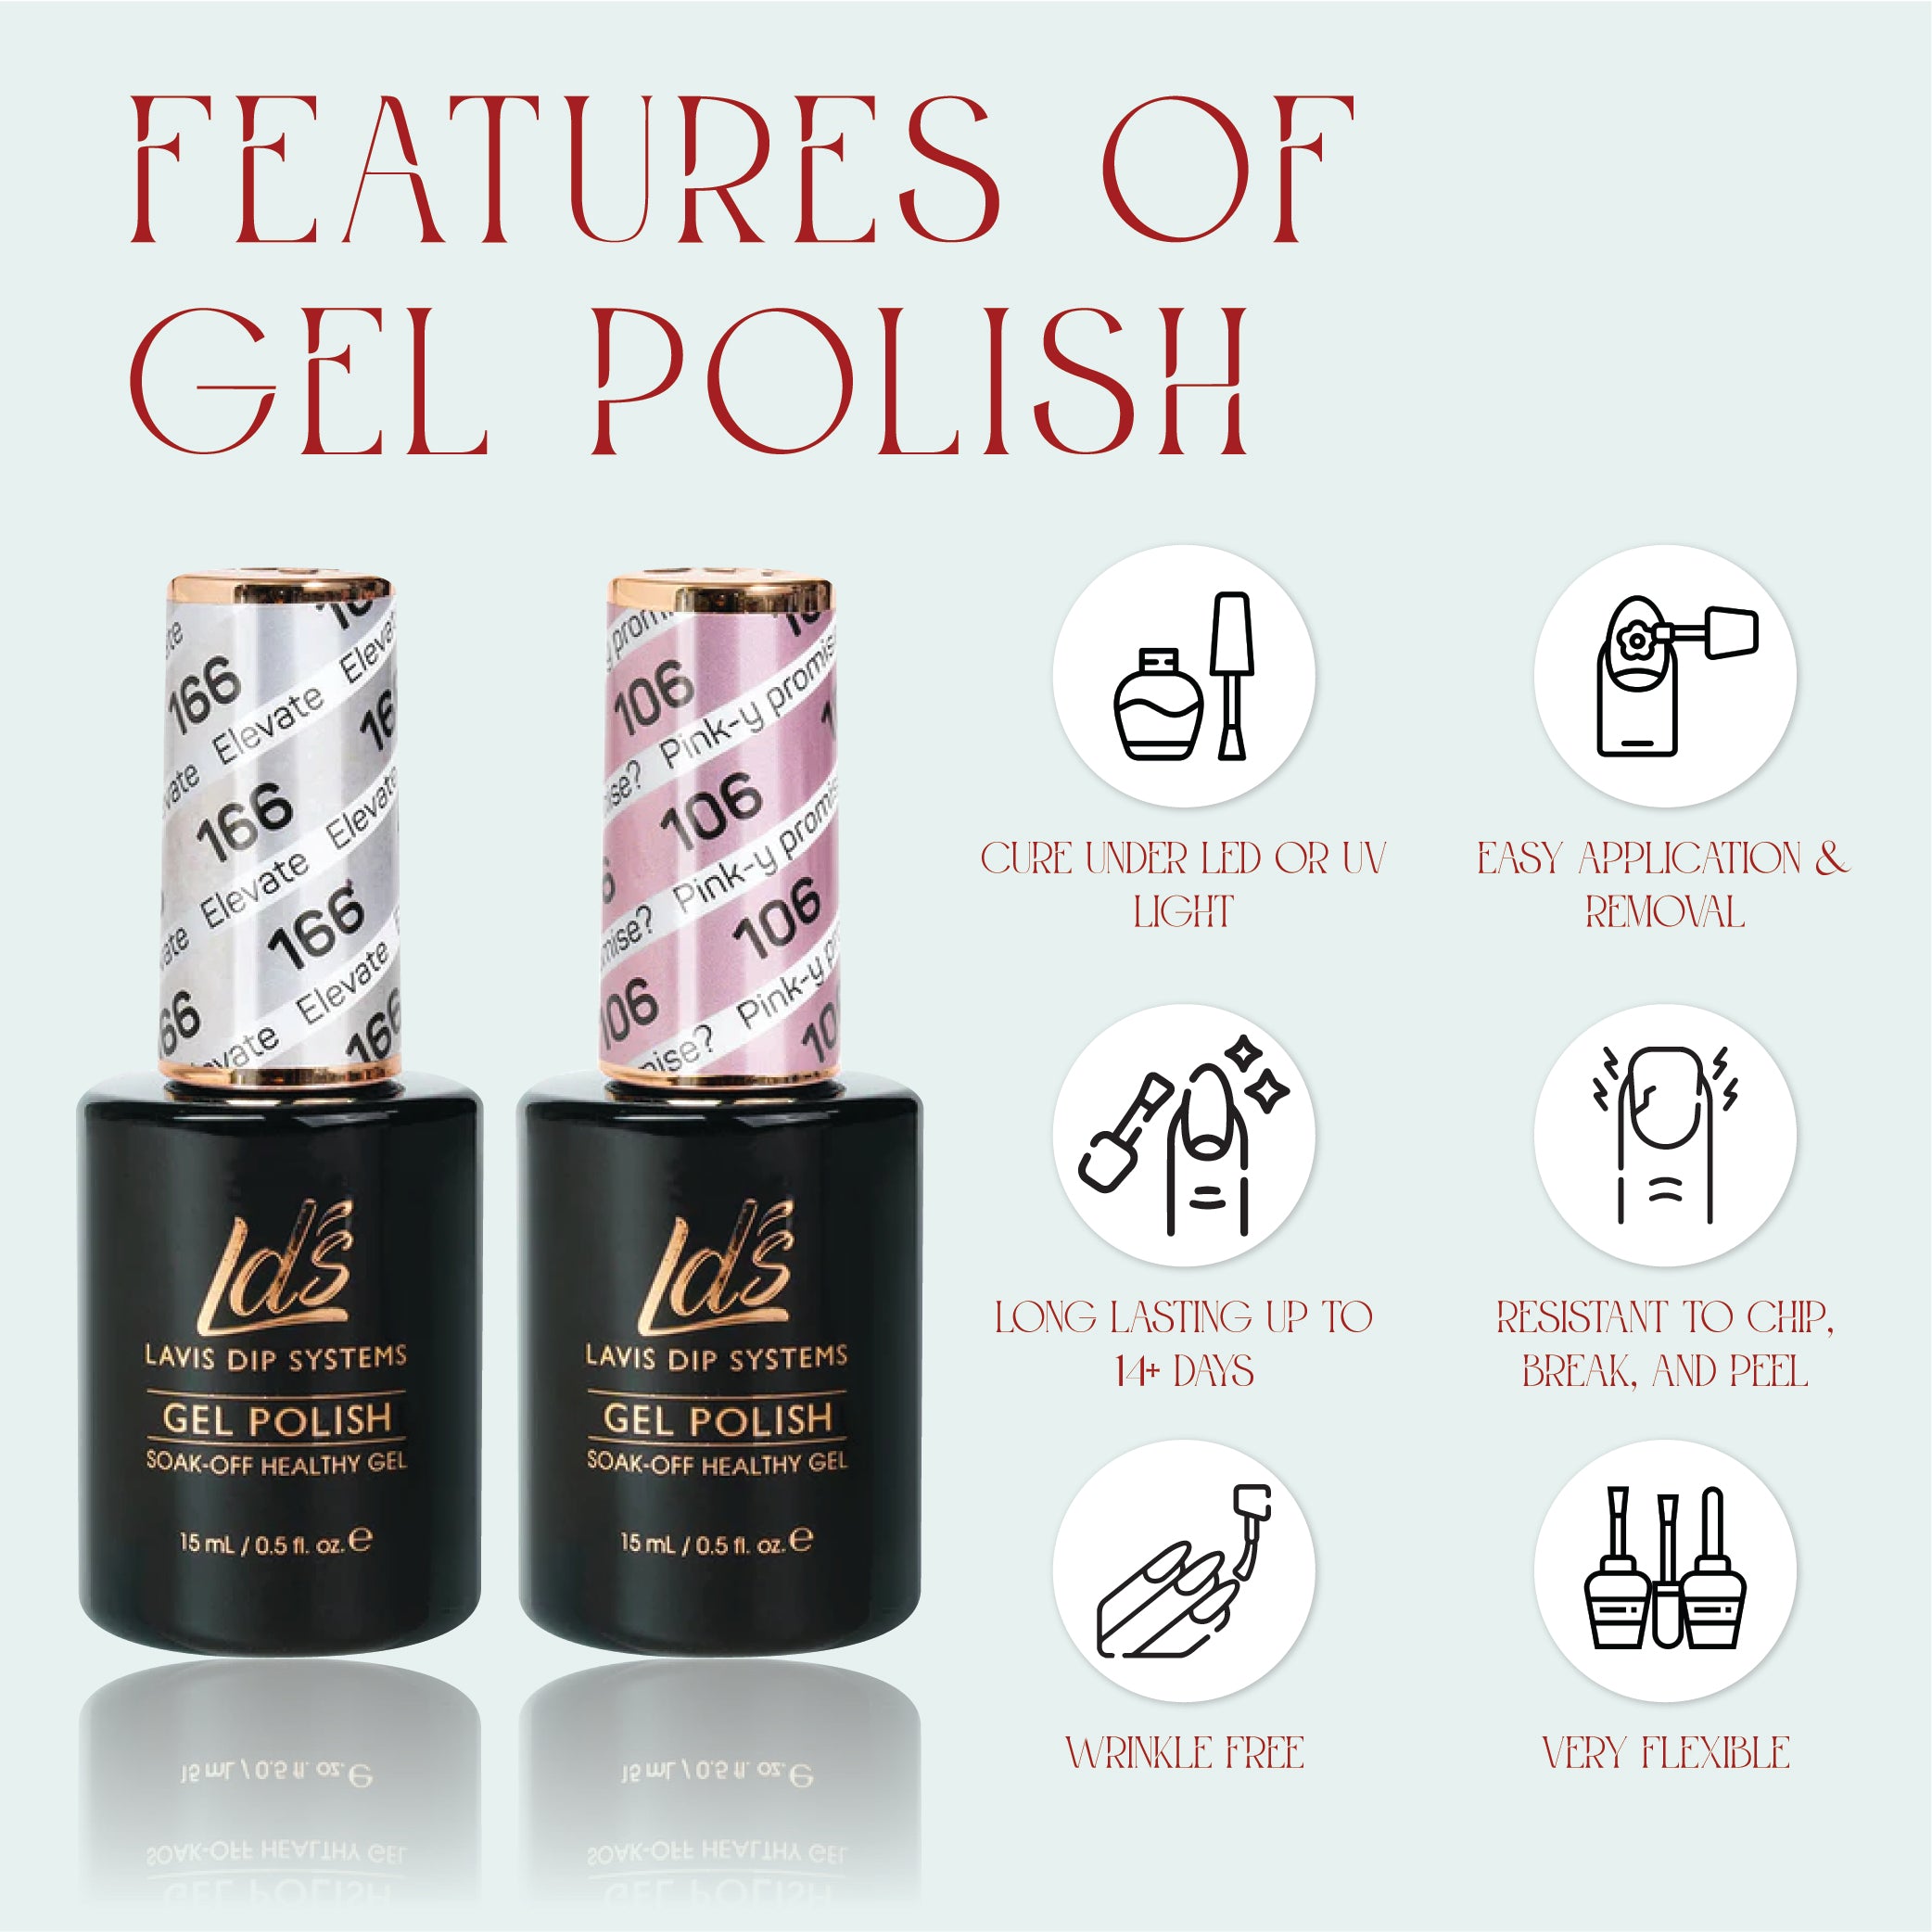 LDS 006 I'm Blushing For You - LDS Healthy Gel Polish & Matching Nail Lacquer Duo Set - 0.5oz